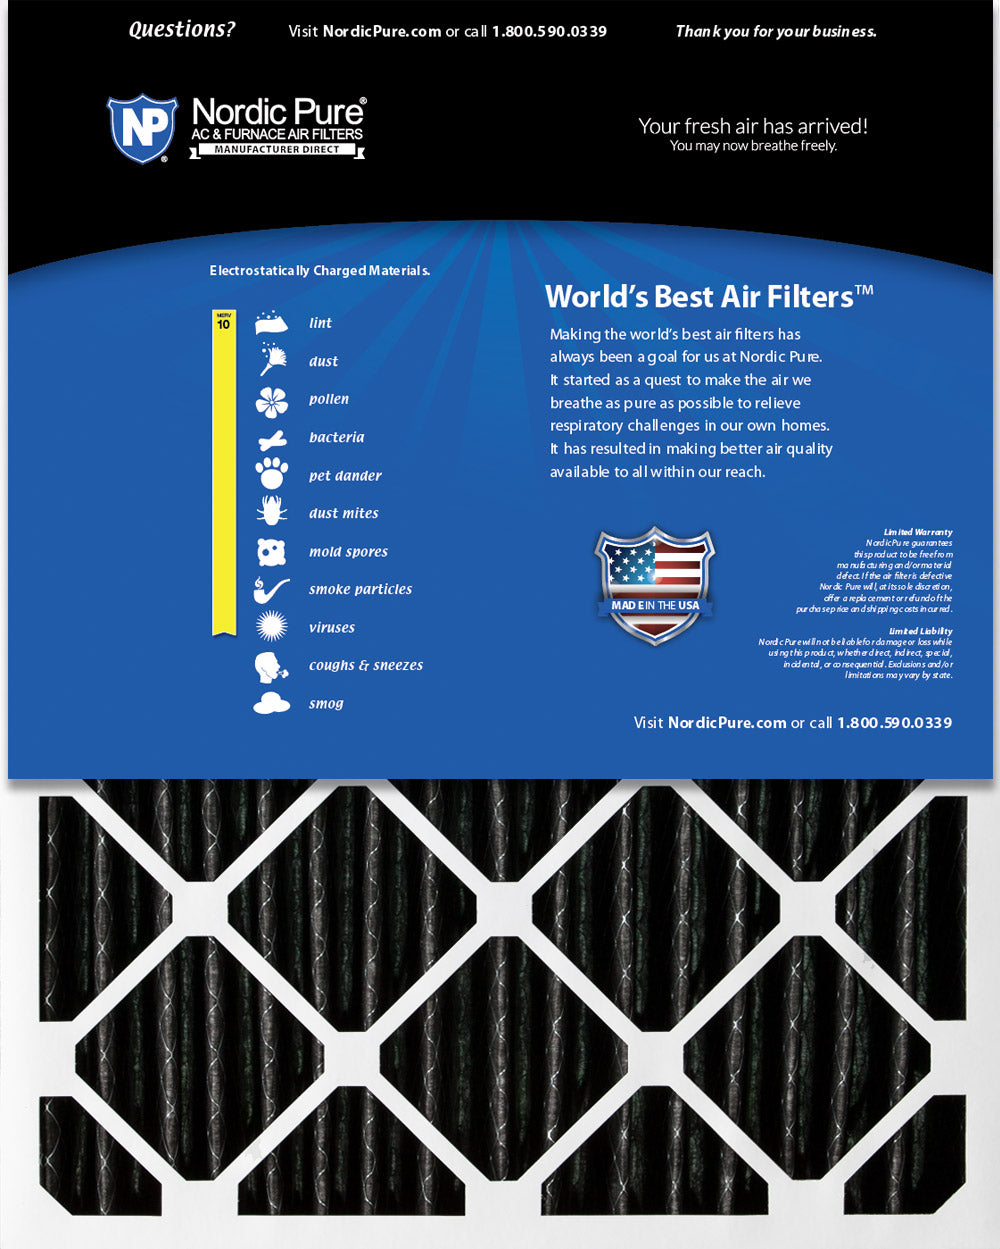 20x24x4 (3 5/8) Furnace Air Filters MERV 10 Pleated Plus Carbon